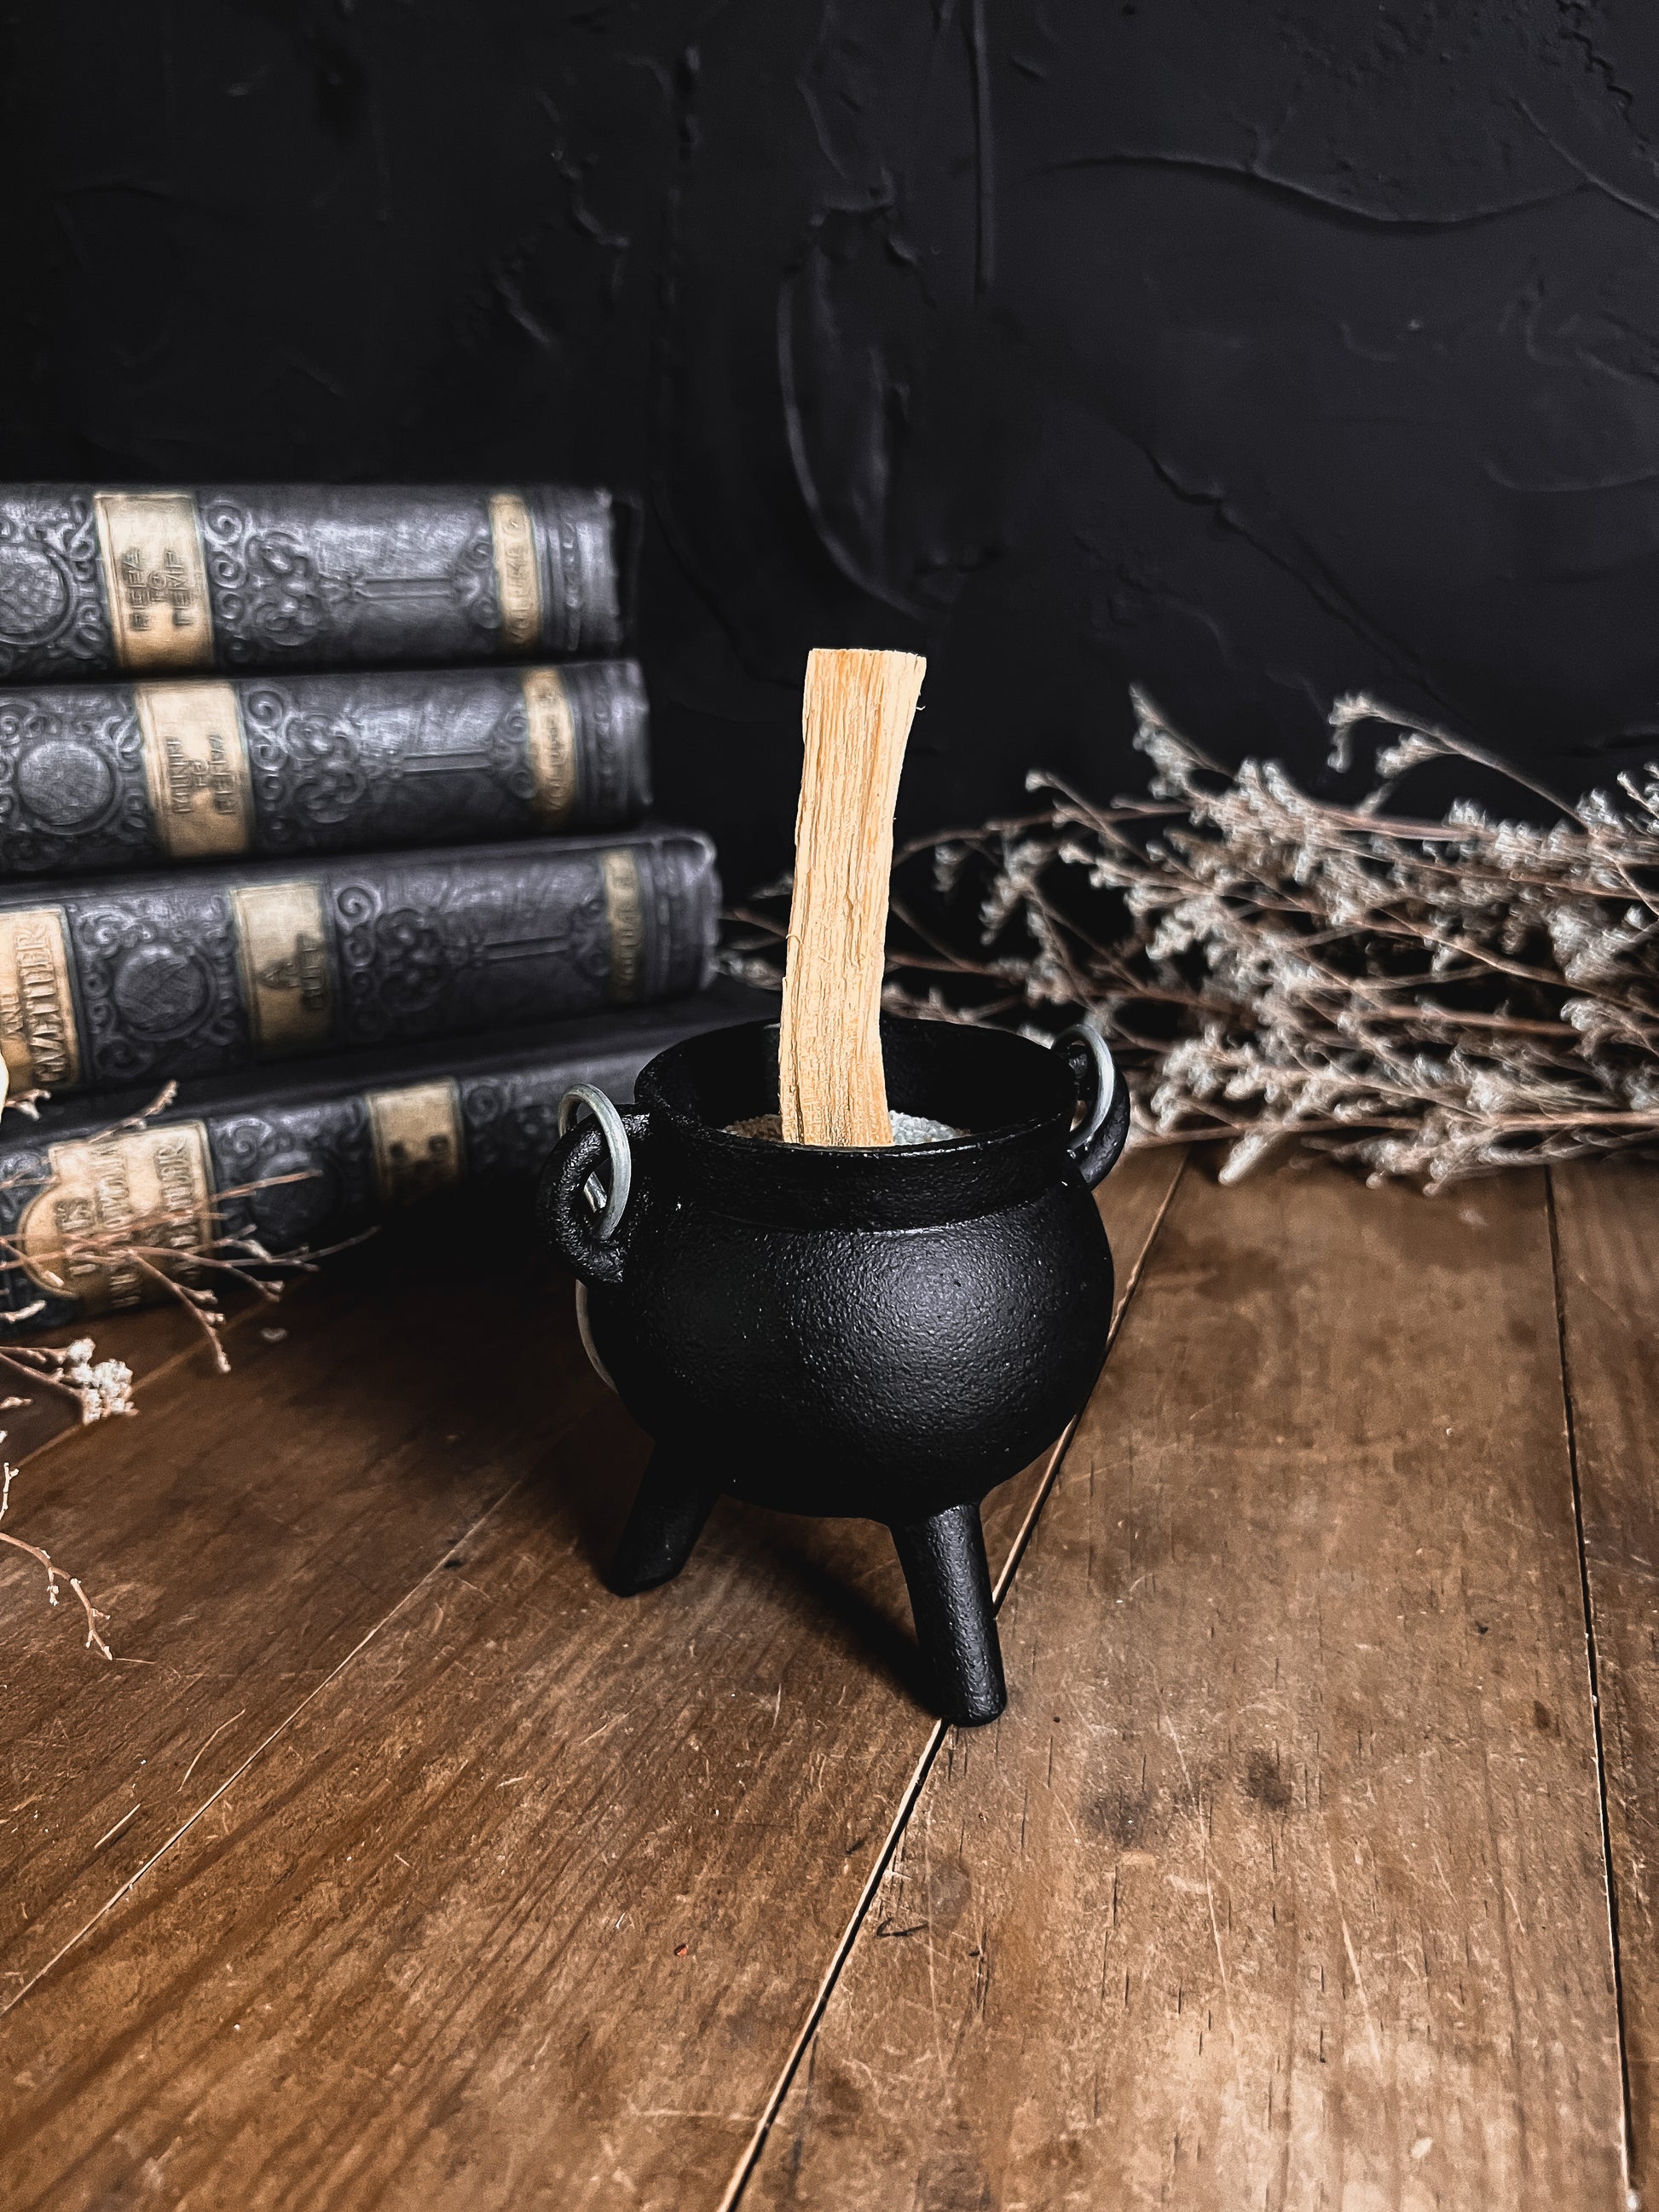 Small Black Cast Iron Cauldron, an indispensable tool for any altar or ritual space.